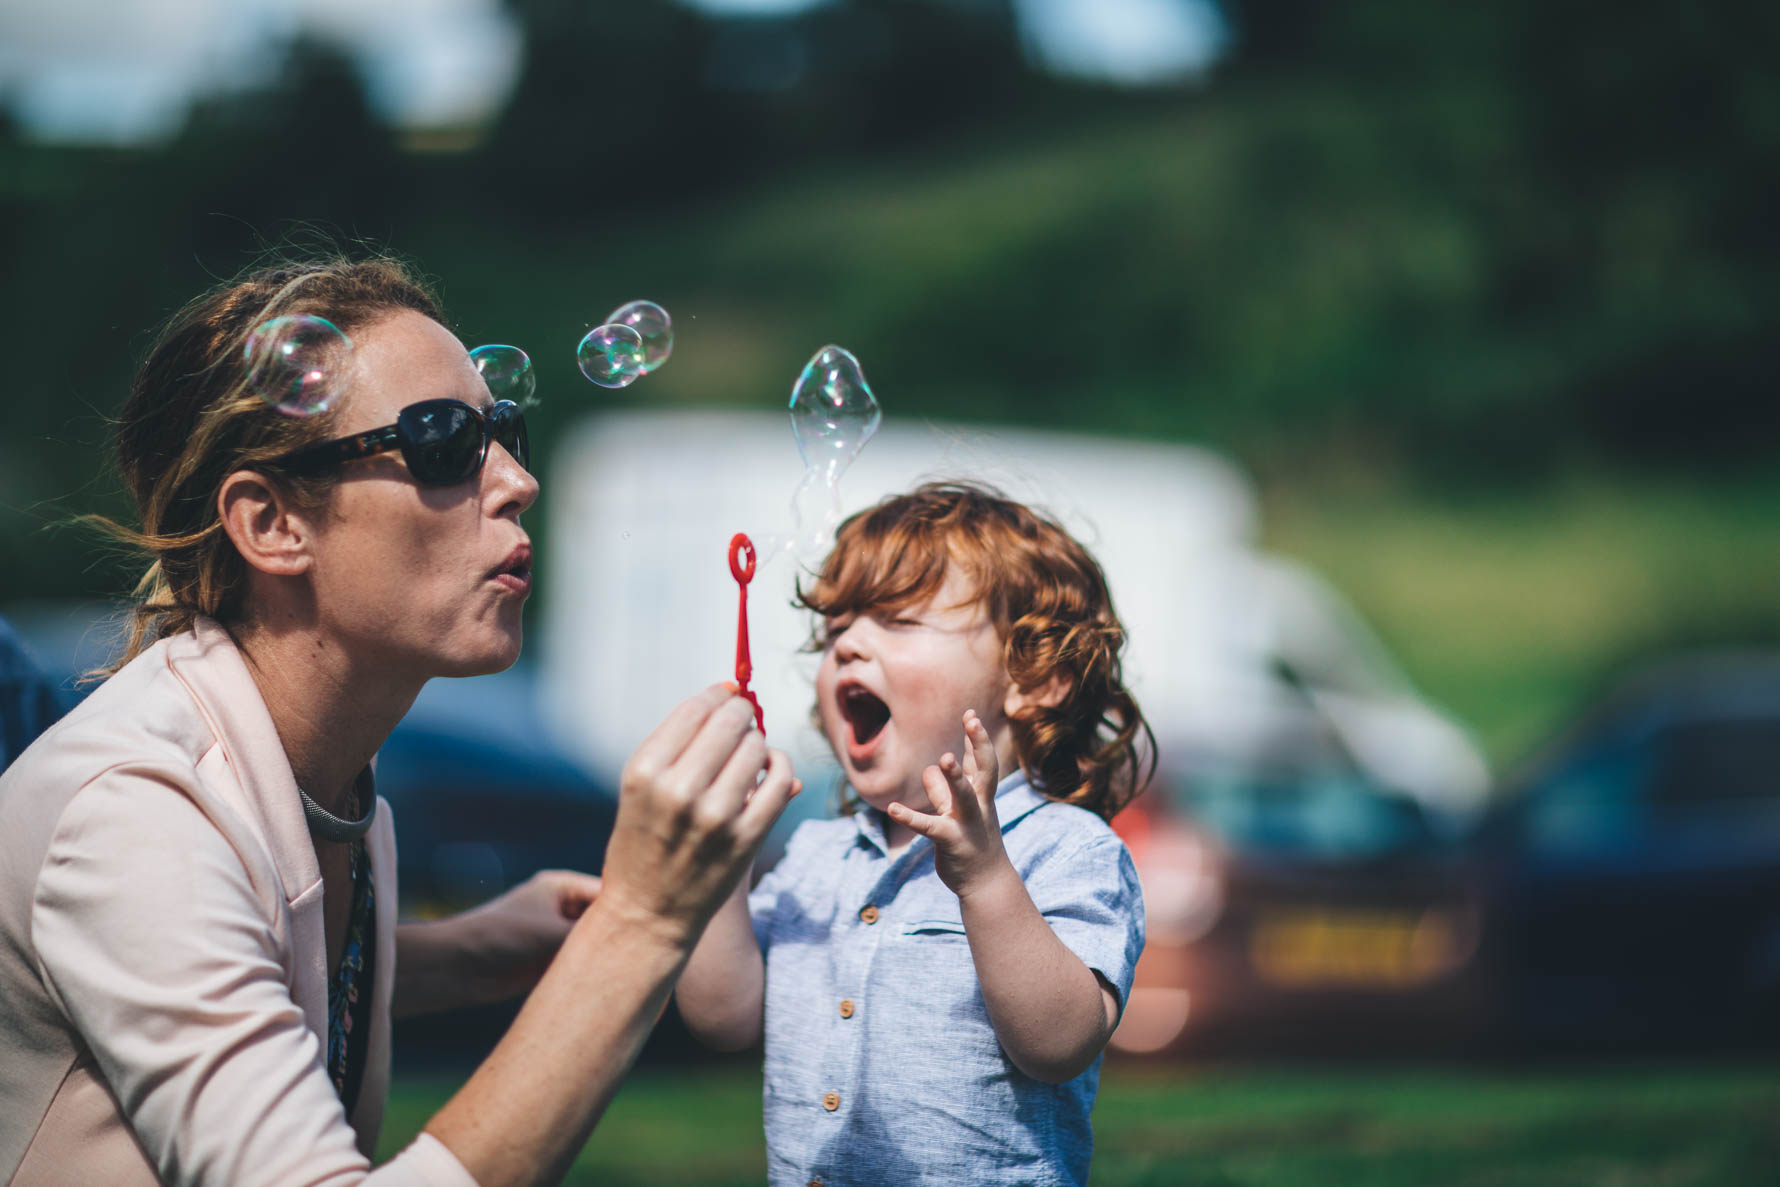 Woman blowing bubbles with a young boy with ginger hair about to catch the bubbles